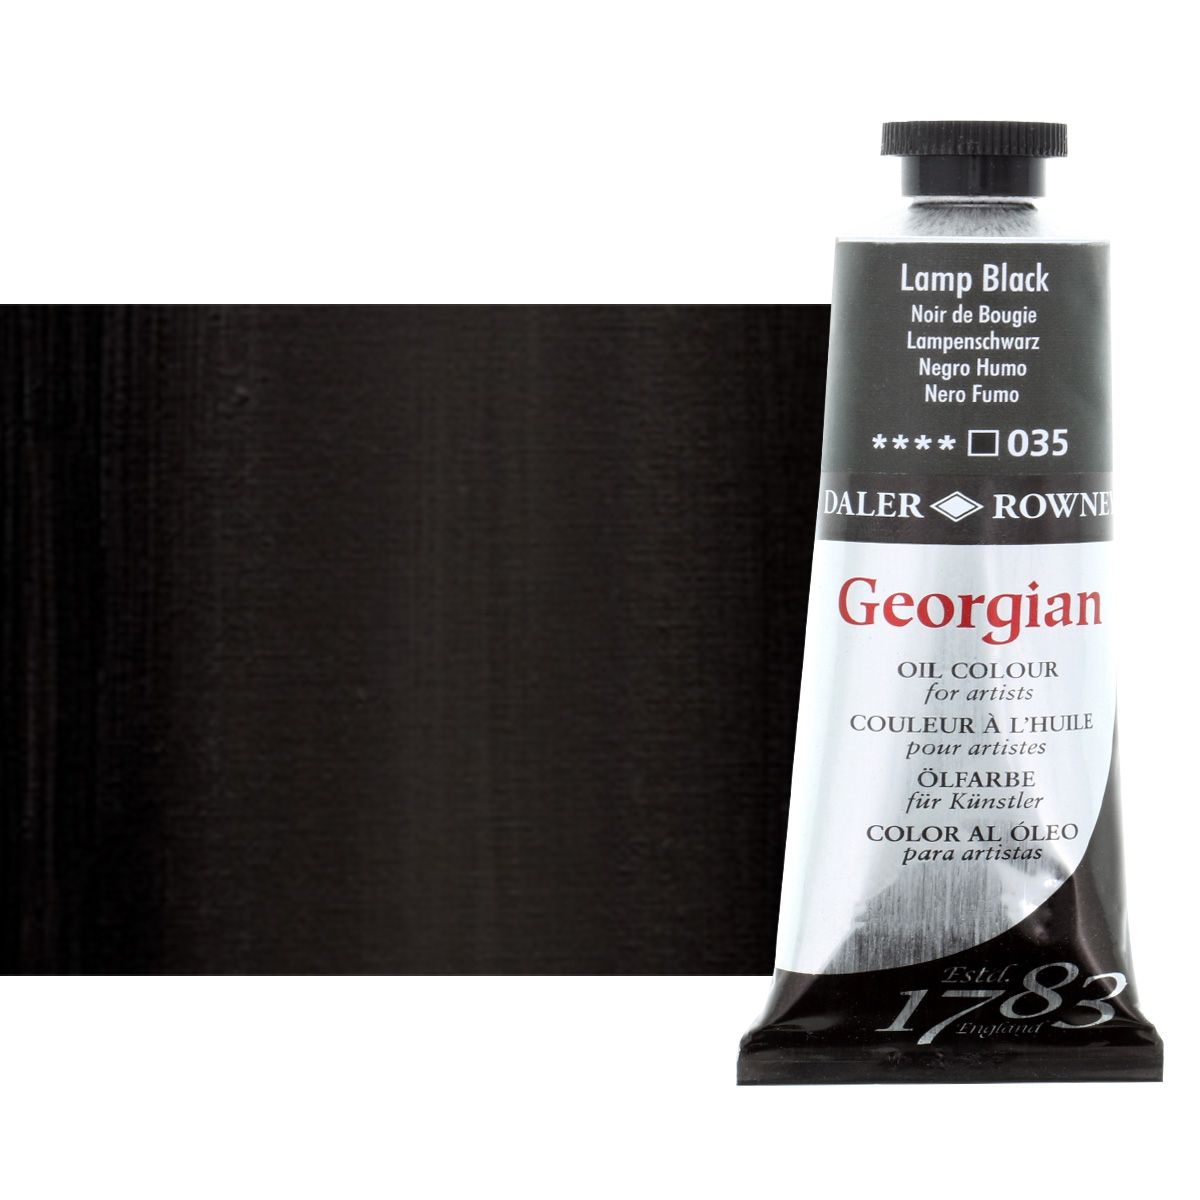 Daler Rowney Georgian Oil Paint Lamp Black 38ml Tube - Art Paints for  Canvas Paper and More - Oil Painting Supplies for Artists and Students -  Artist